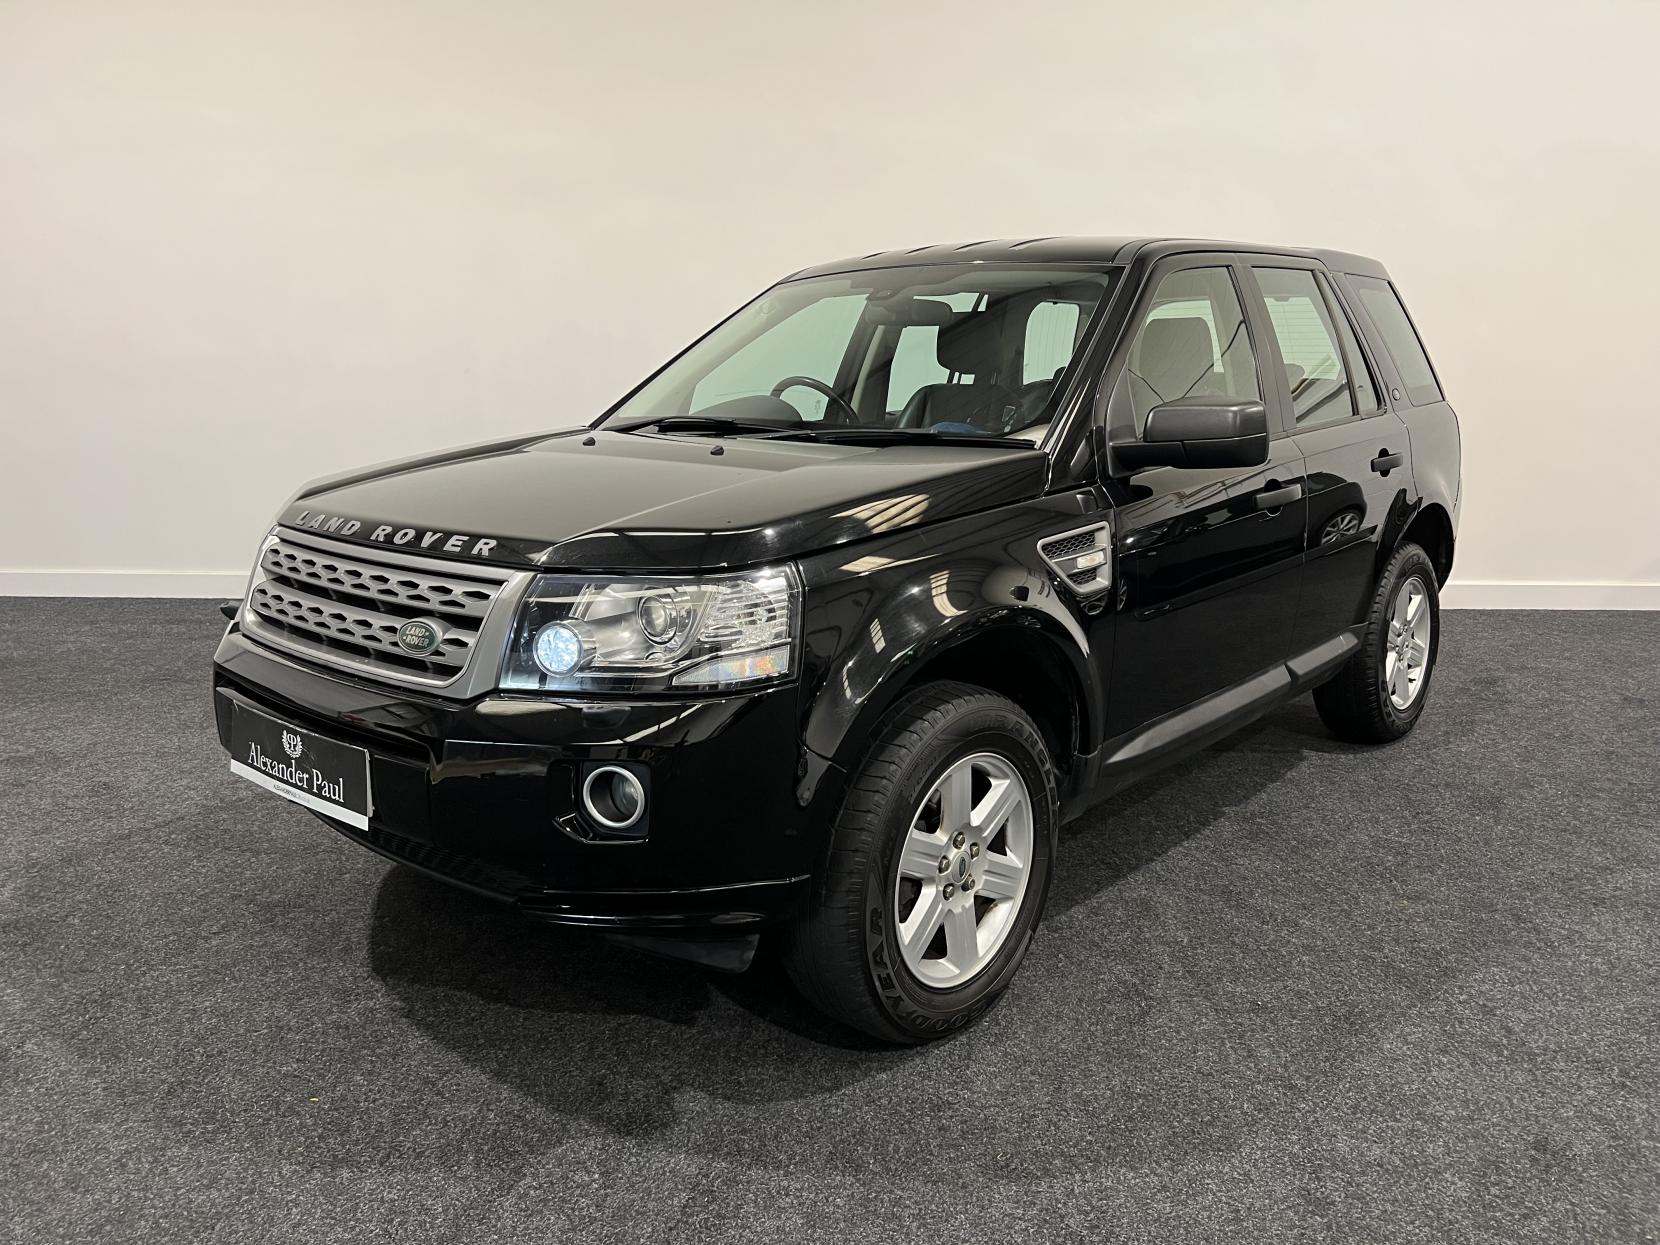 Land Rover Freelander 2 2.2 TD4 GS SUV 5dr Diesel Manual 4WD Euro 5 (s/s) (150 ps)